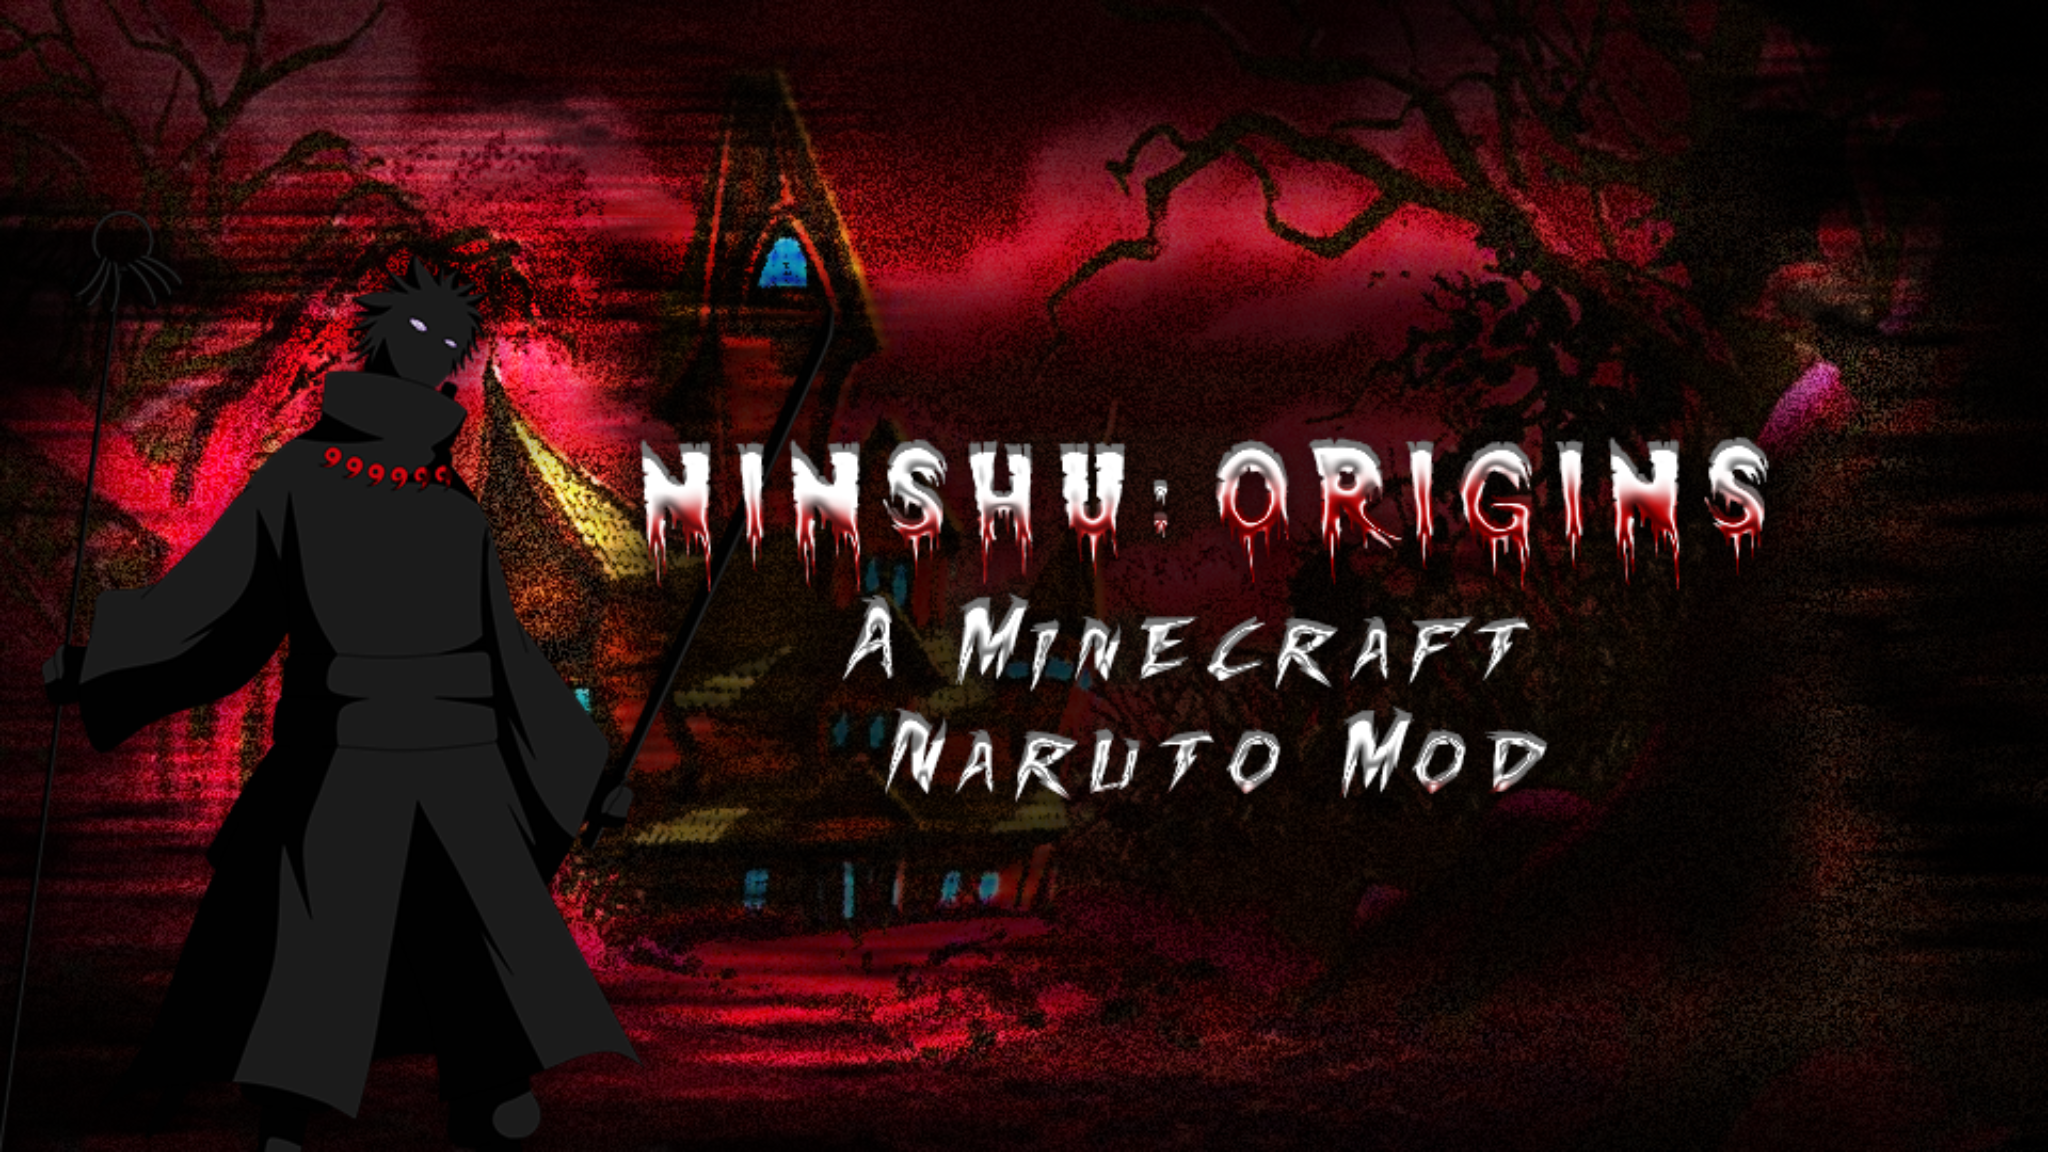 Become Naruto in this Minecraft Server - Use Powerful Jutsus